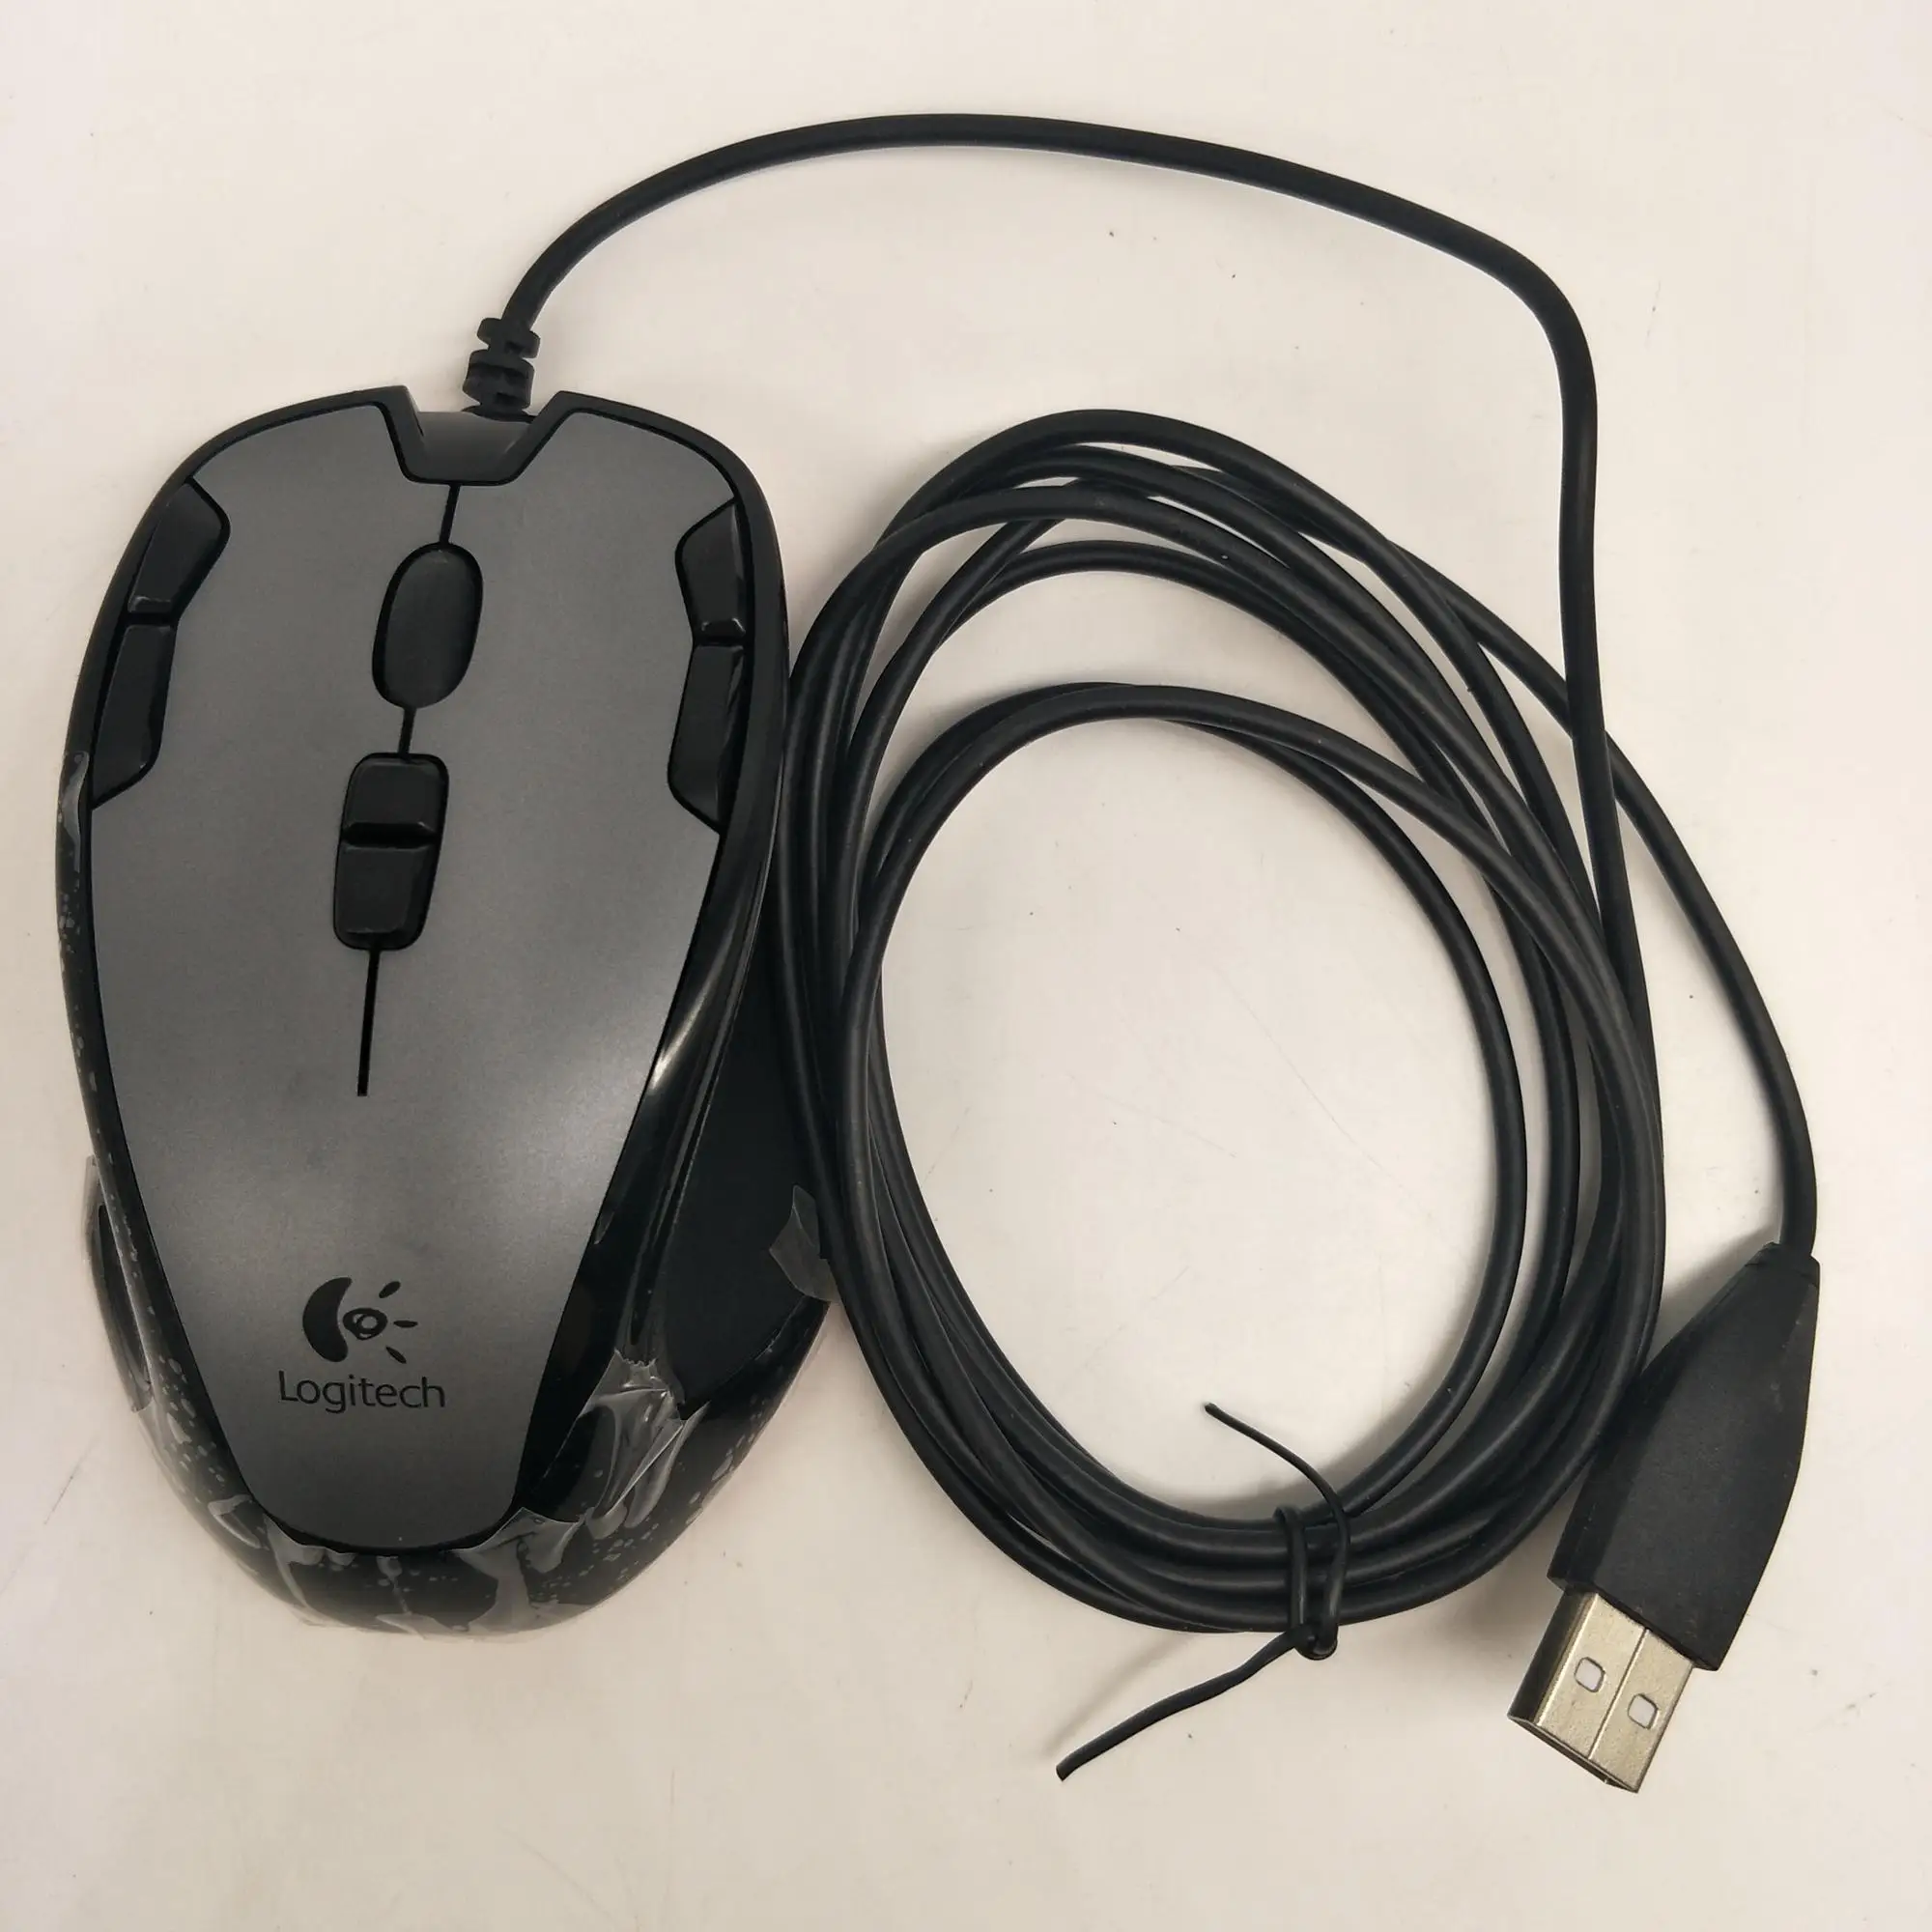 Genuine Logitech Gaming Mouse G300 Nine Programmable Controls 2500 Dpi 9 Buttons Without Original Package Buy Logitech G300 Programmable Controls 2500 Dpi Gaming Mouse G300 Product On Alibaba Com